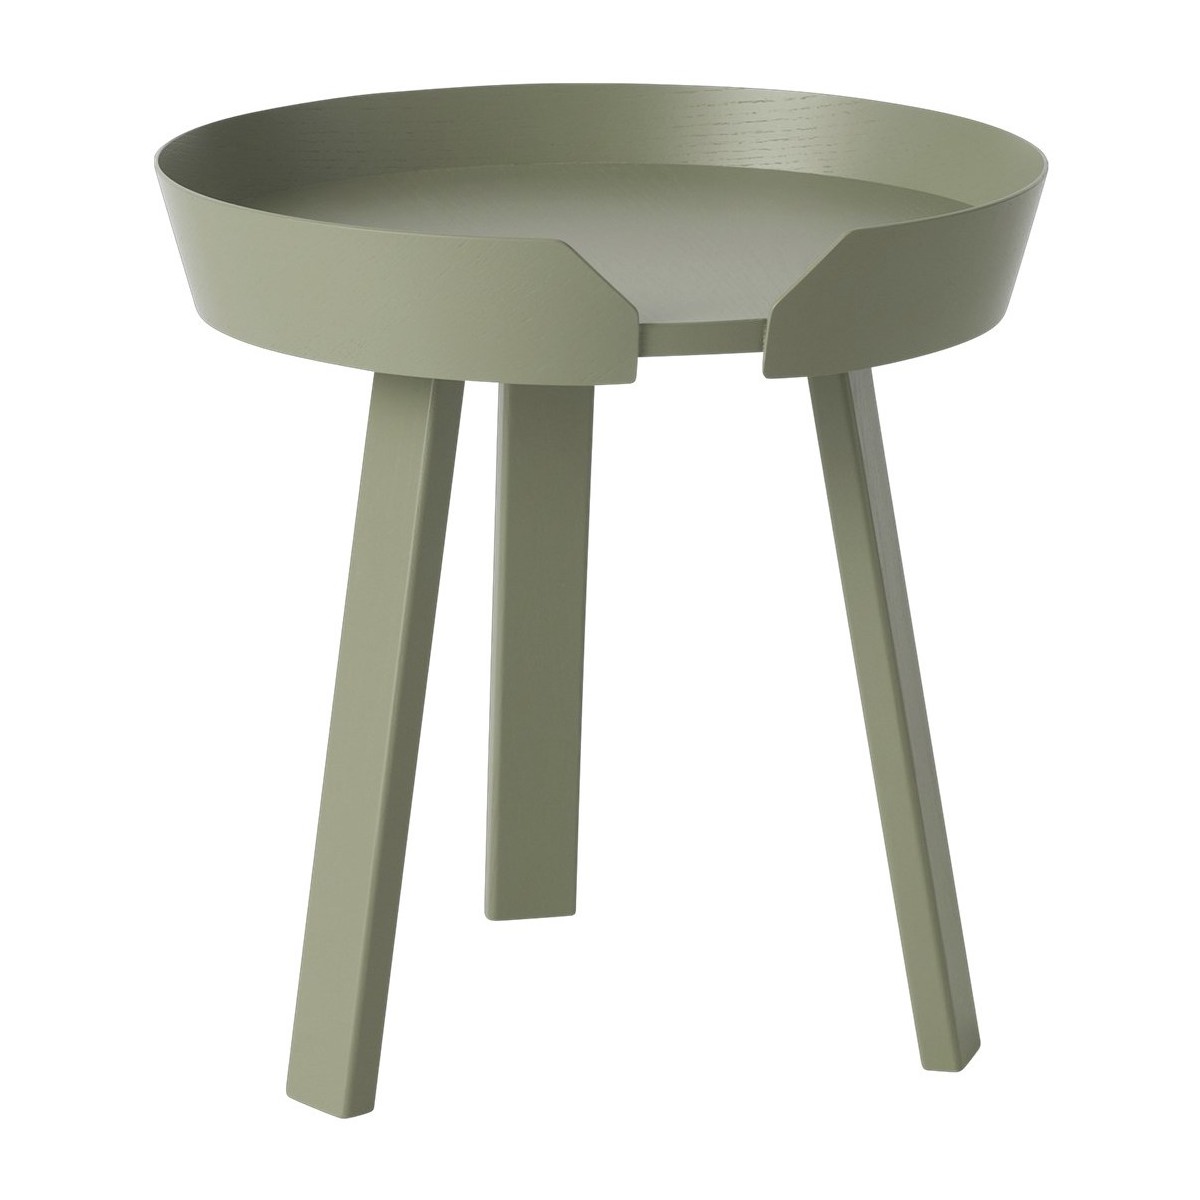 dusty green - Small Around Table